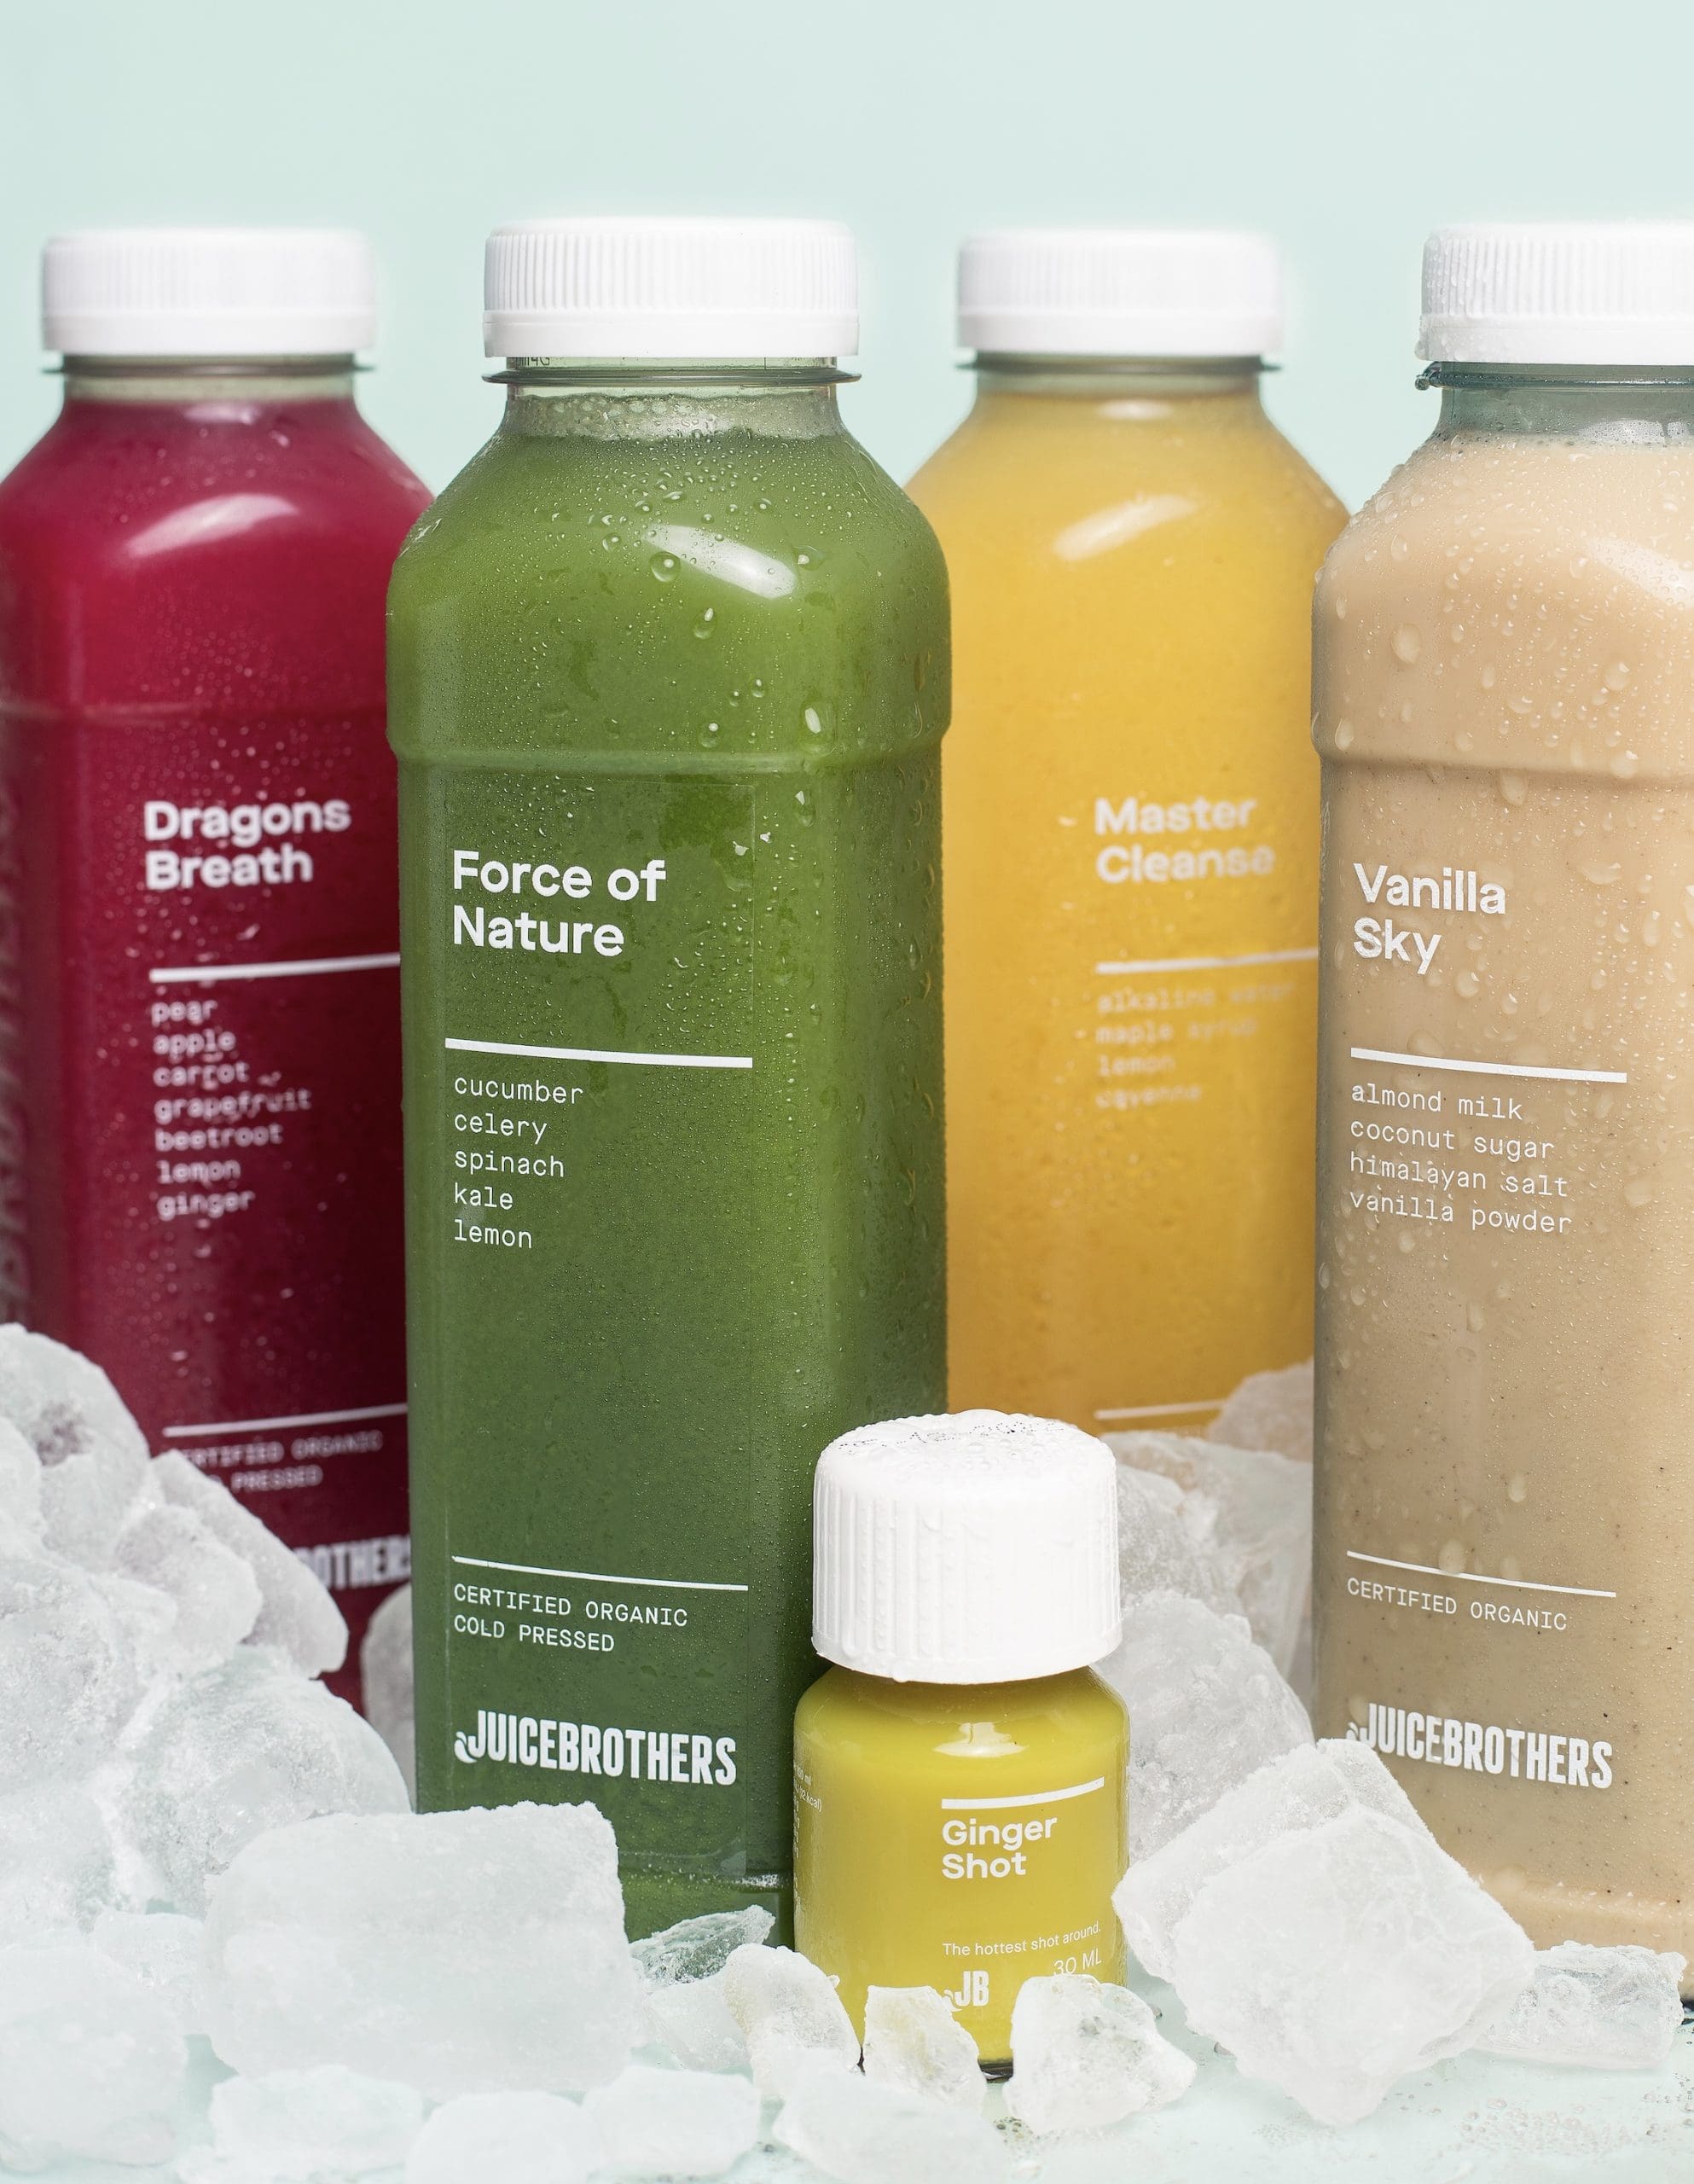 Juicebrothers juice cleanse 3 days Deeper, detox, juices, juice fasting, different flavors